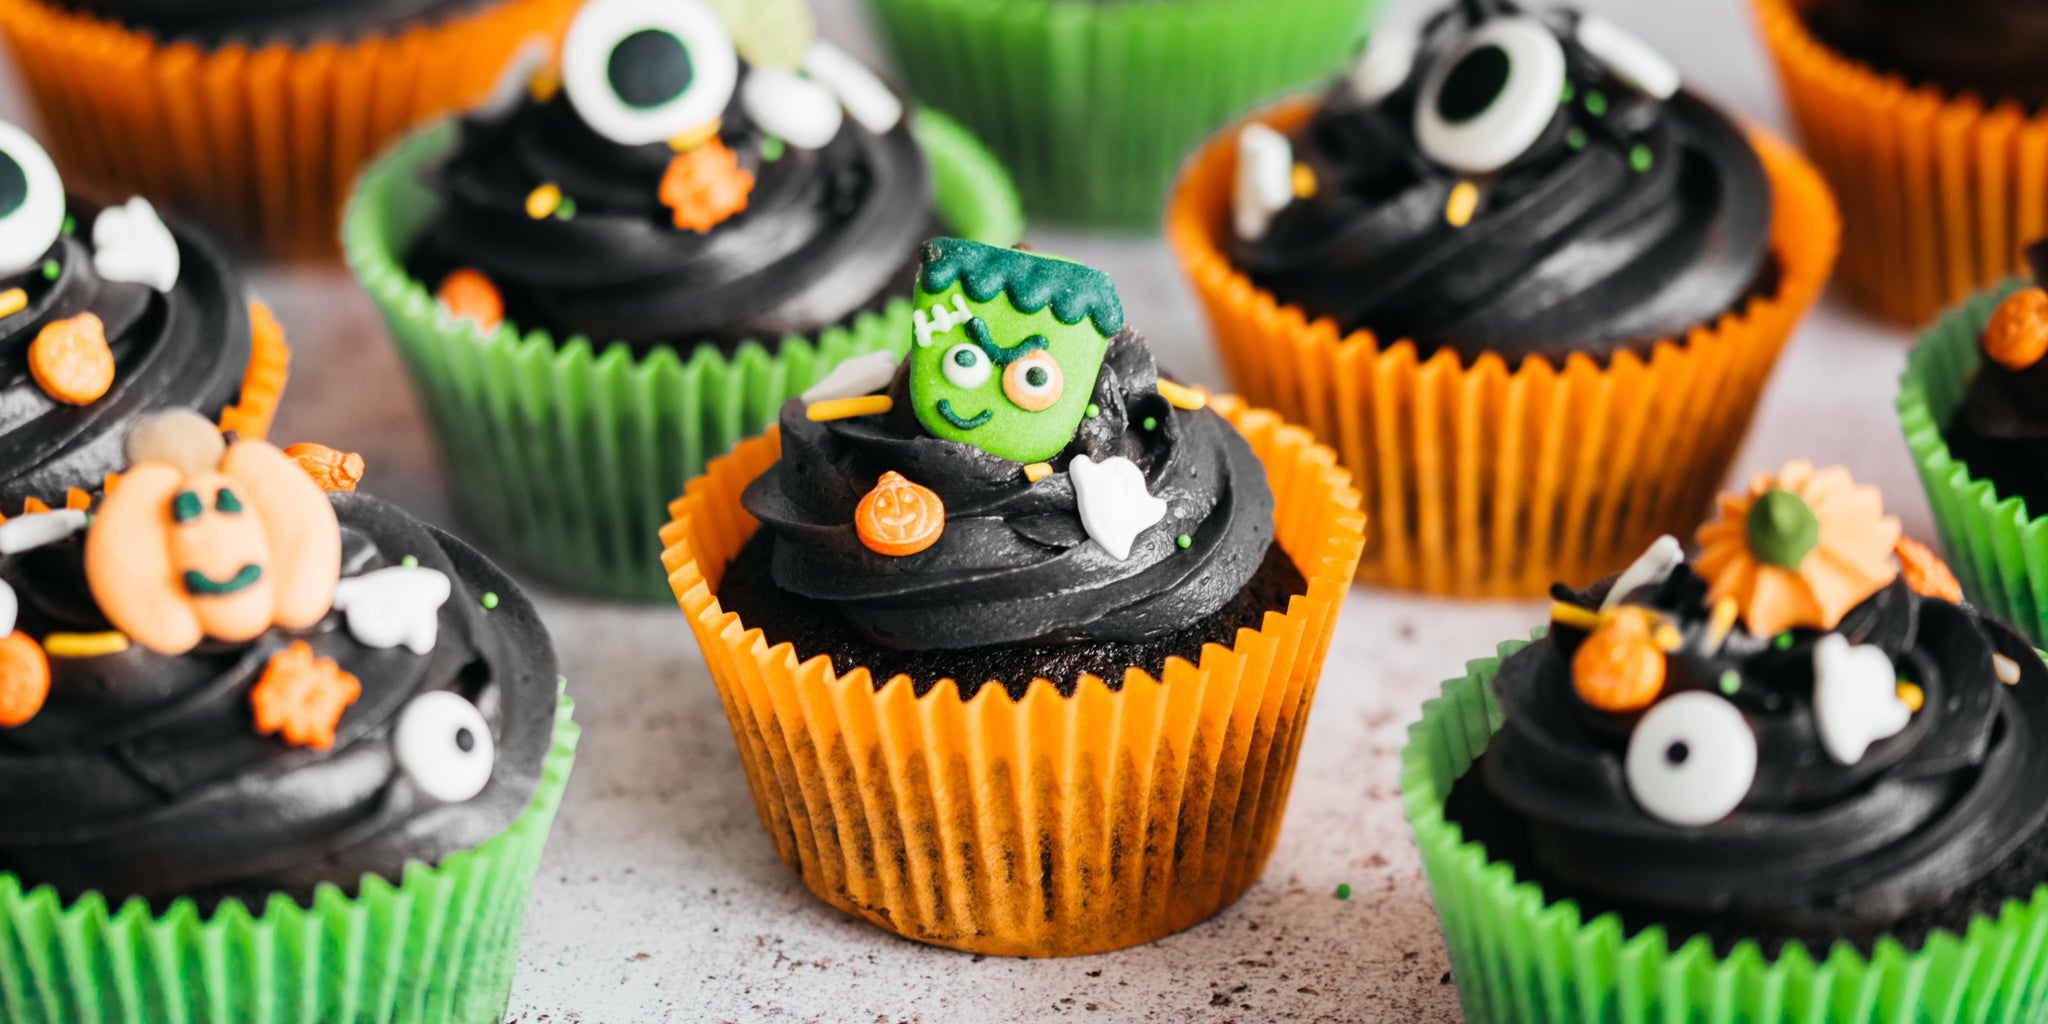 Halloween cupcakes with black icing